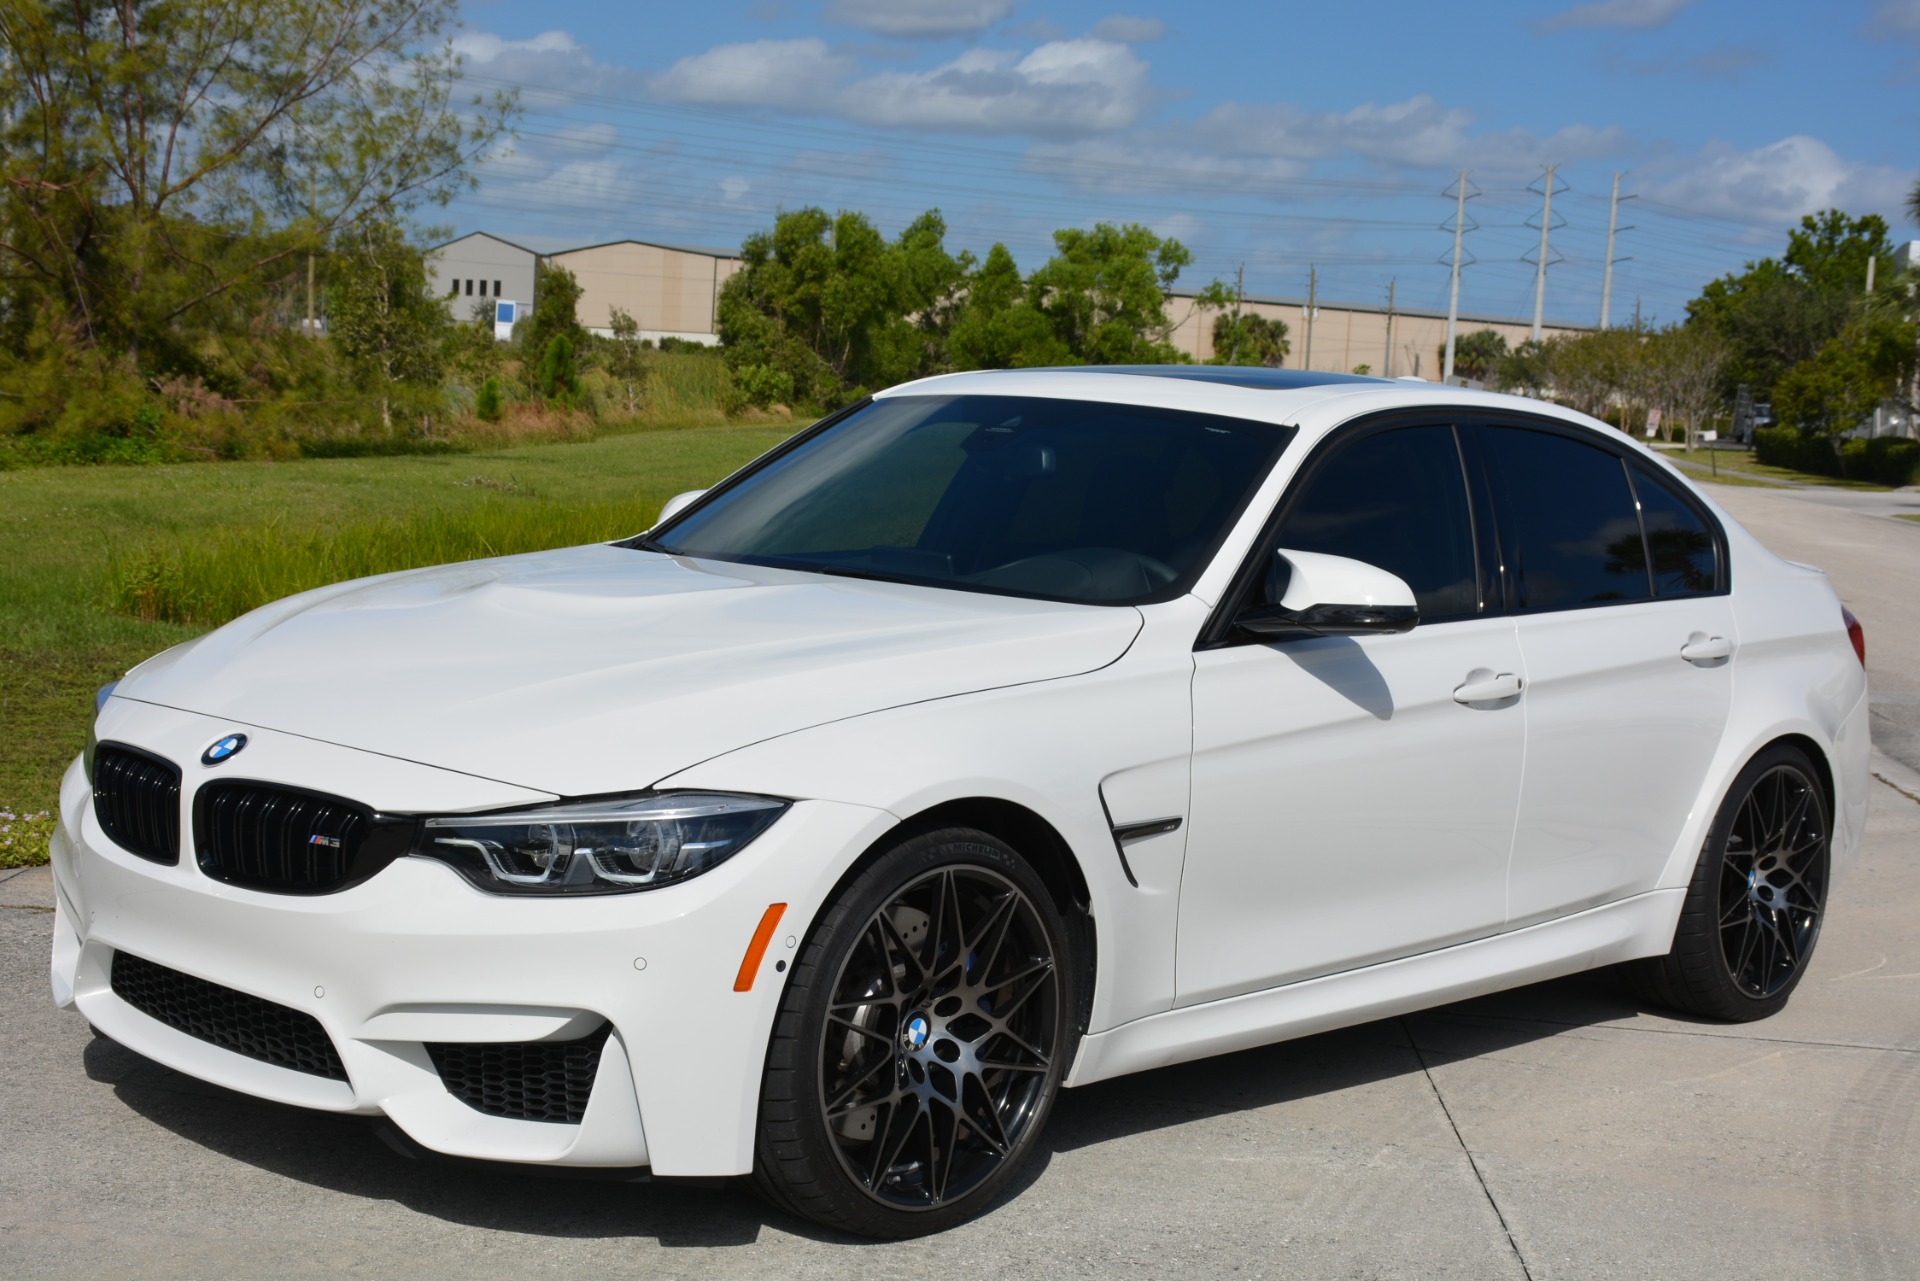 Used 2018 Bmw M3 For Sale 64 900 Marino Performance